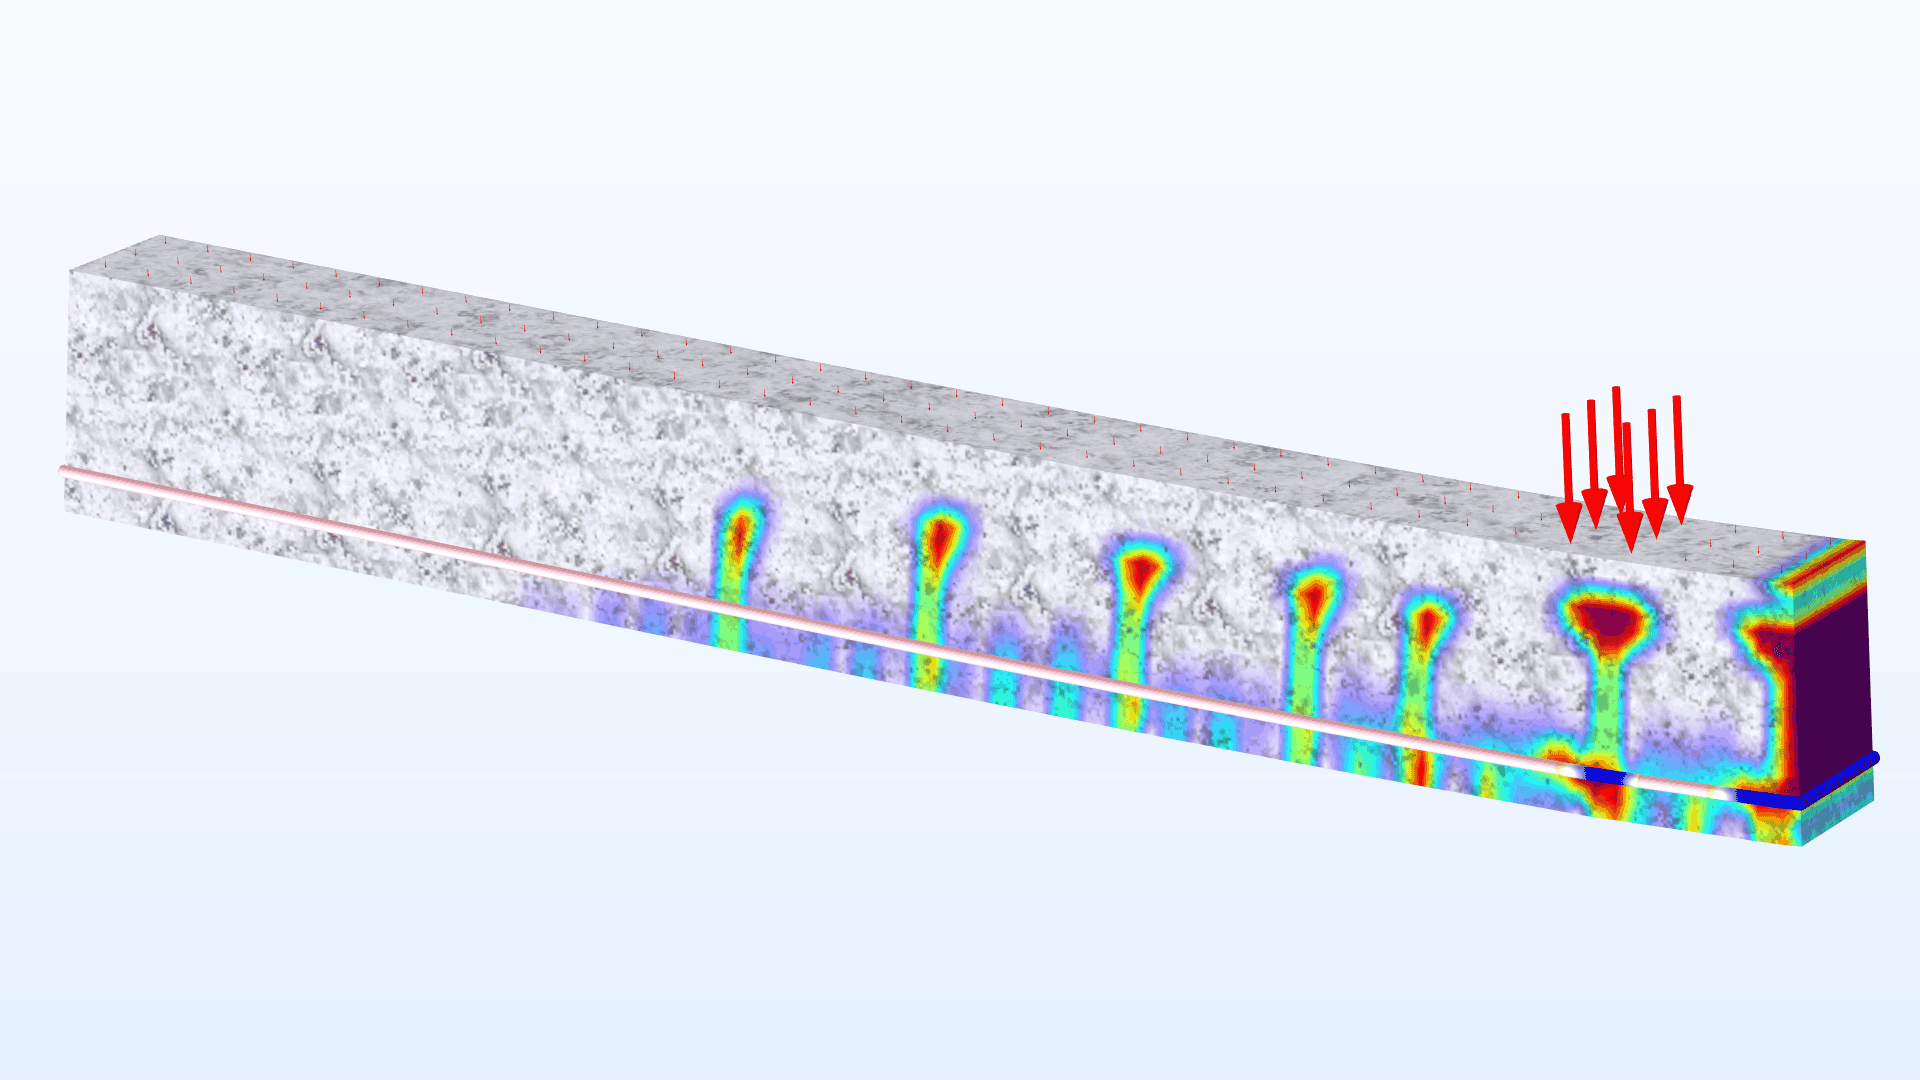 A concrete beam model showing the damage in the Prism color table, with red arrows representing a load on the top surface of the beam.